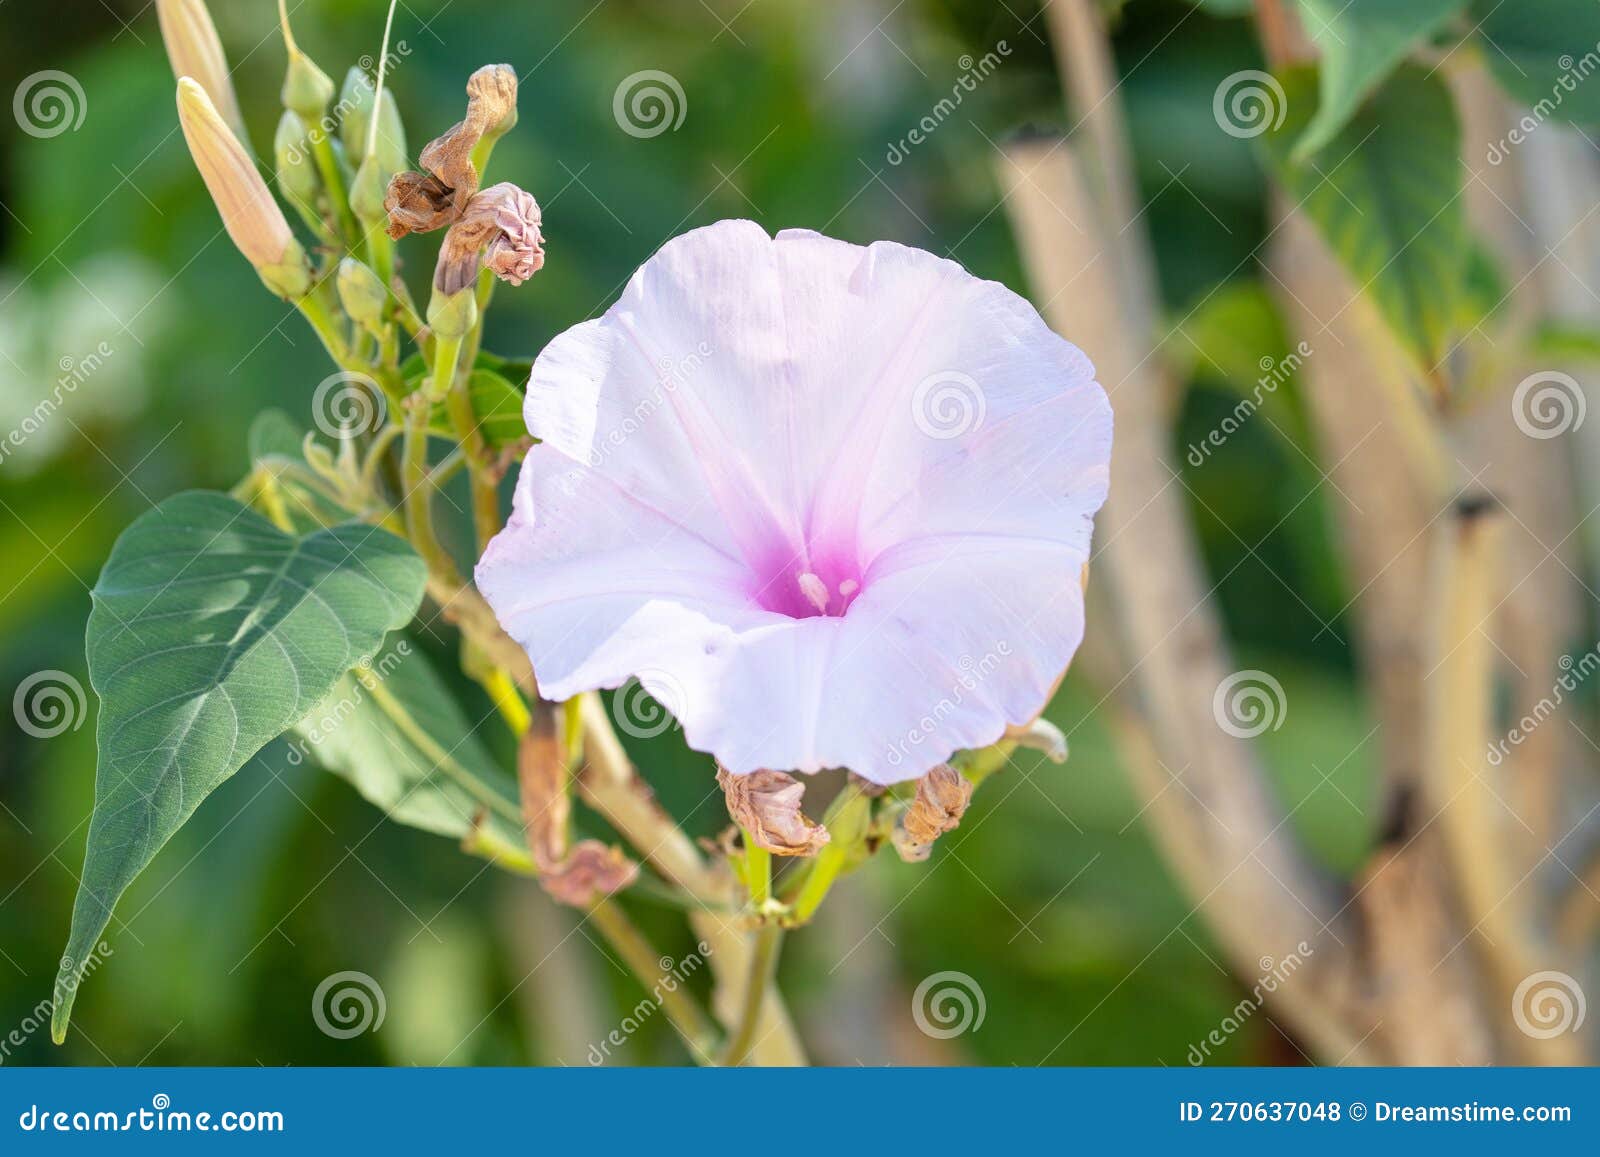 ipomoea carnea flowers and leaves. kangkung pagar or ipomoea carnea, purple pink morning glory,